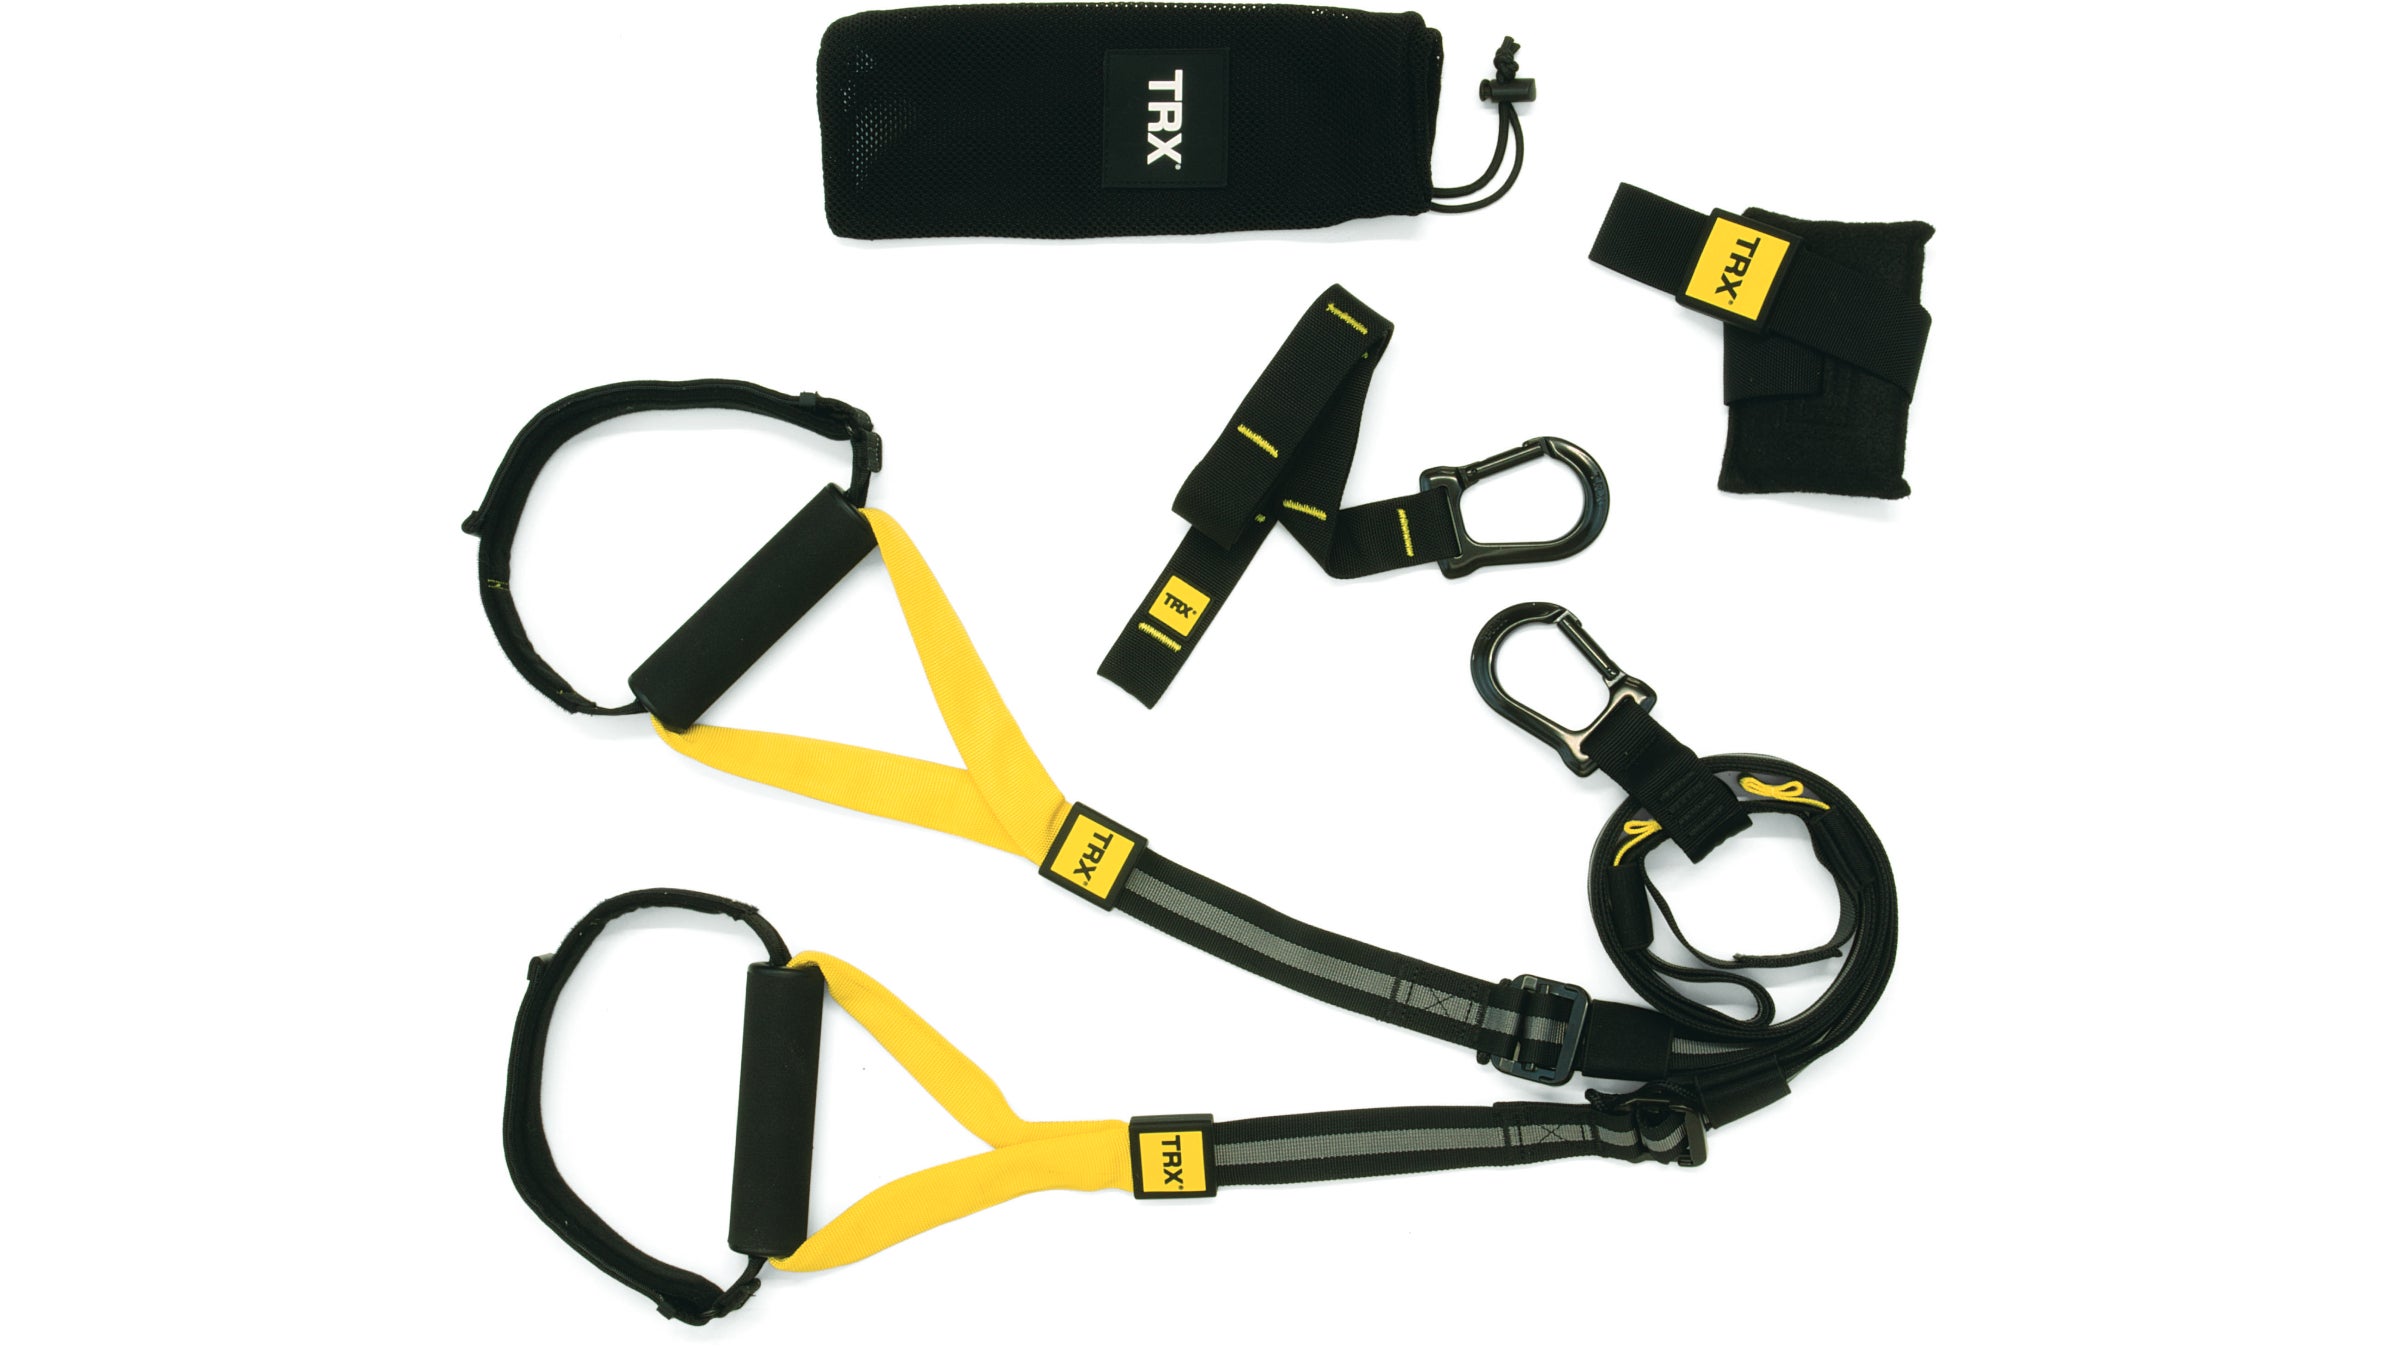 TRX straps and case